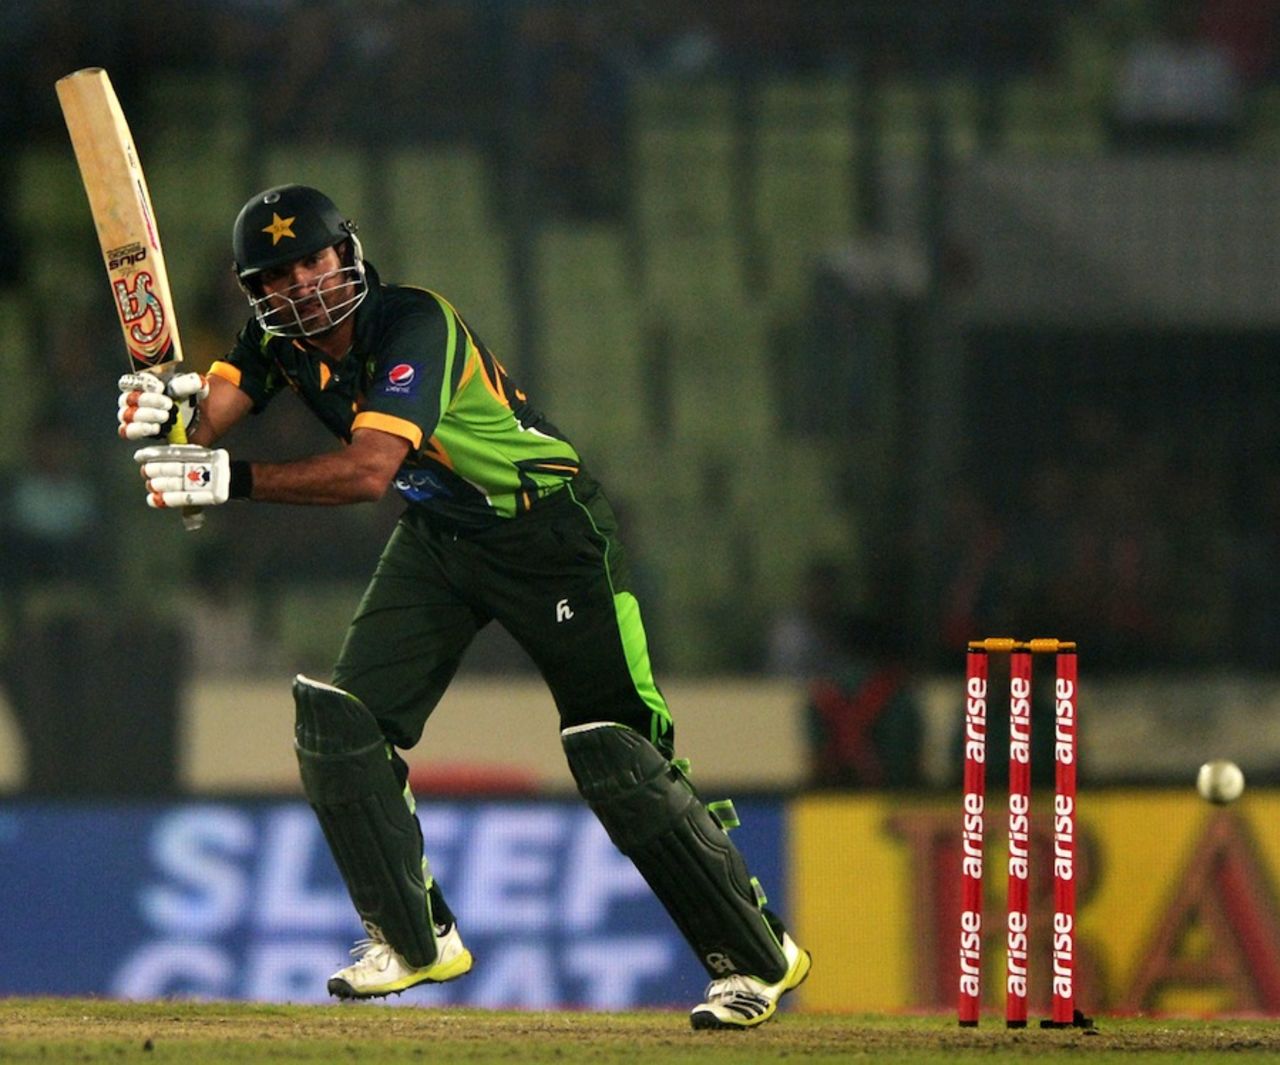 Sohaib Maqsood guides the ball to the leg side, India v Pakistan, Asia Cup, Mirpur, March 2, 2014